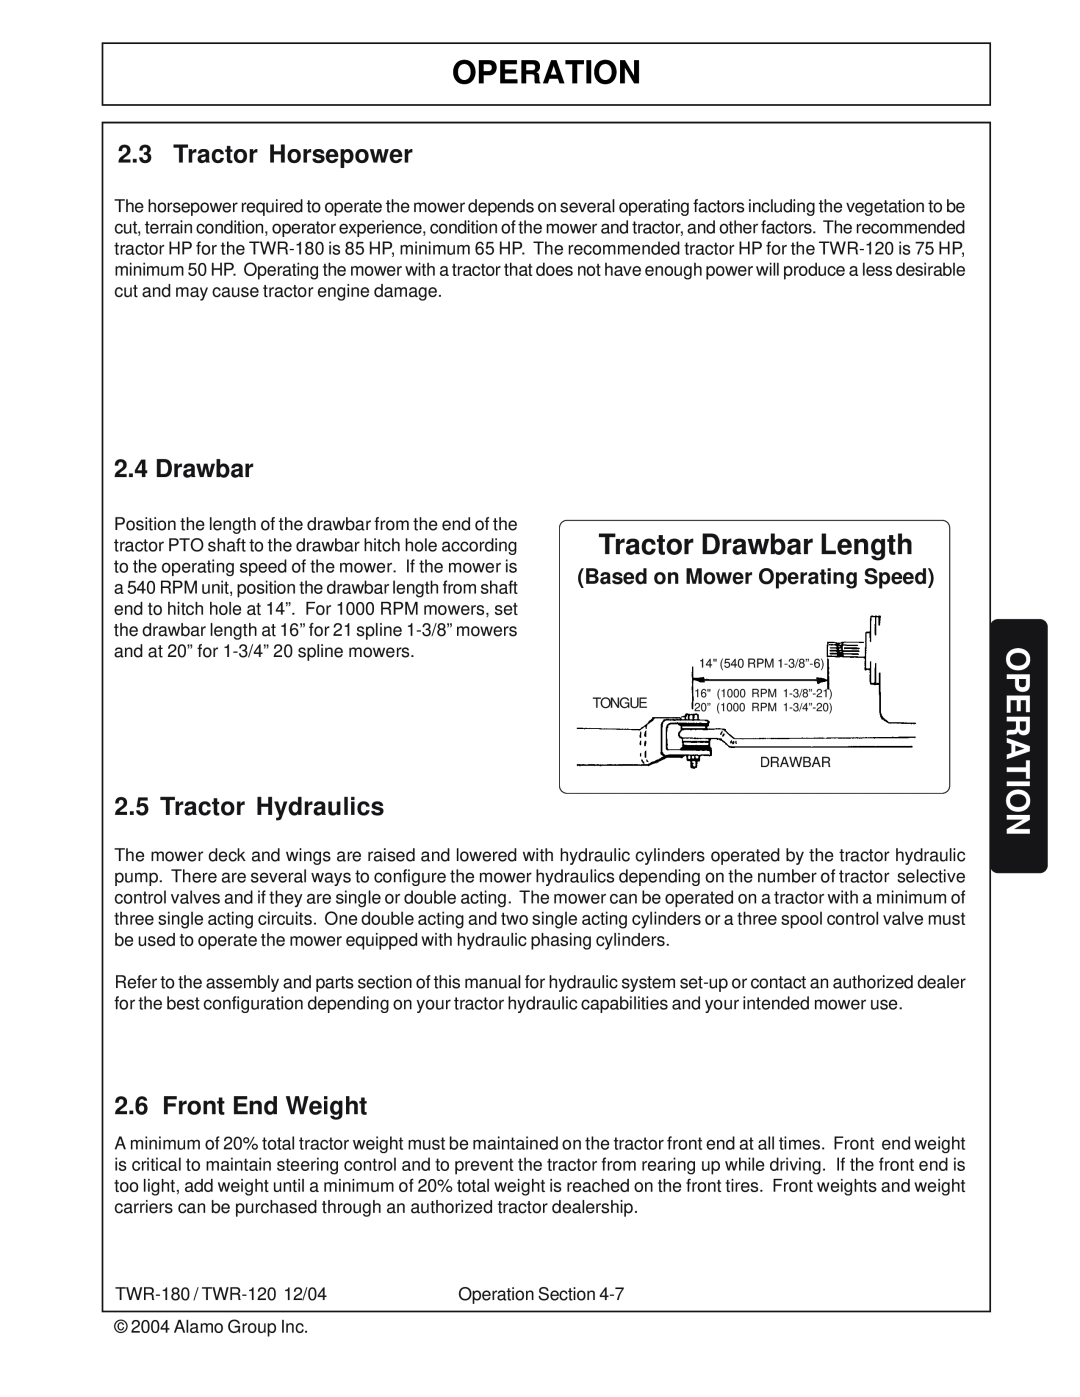 Tiger Products Co., Ltd TWR-120, TWR-180 manual Tractor Drawbar Length, Operation, Tractor Horsepower, Tractor Hydraulics 